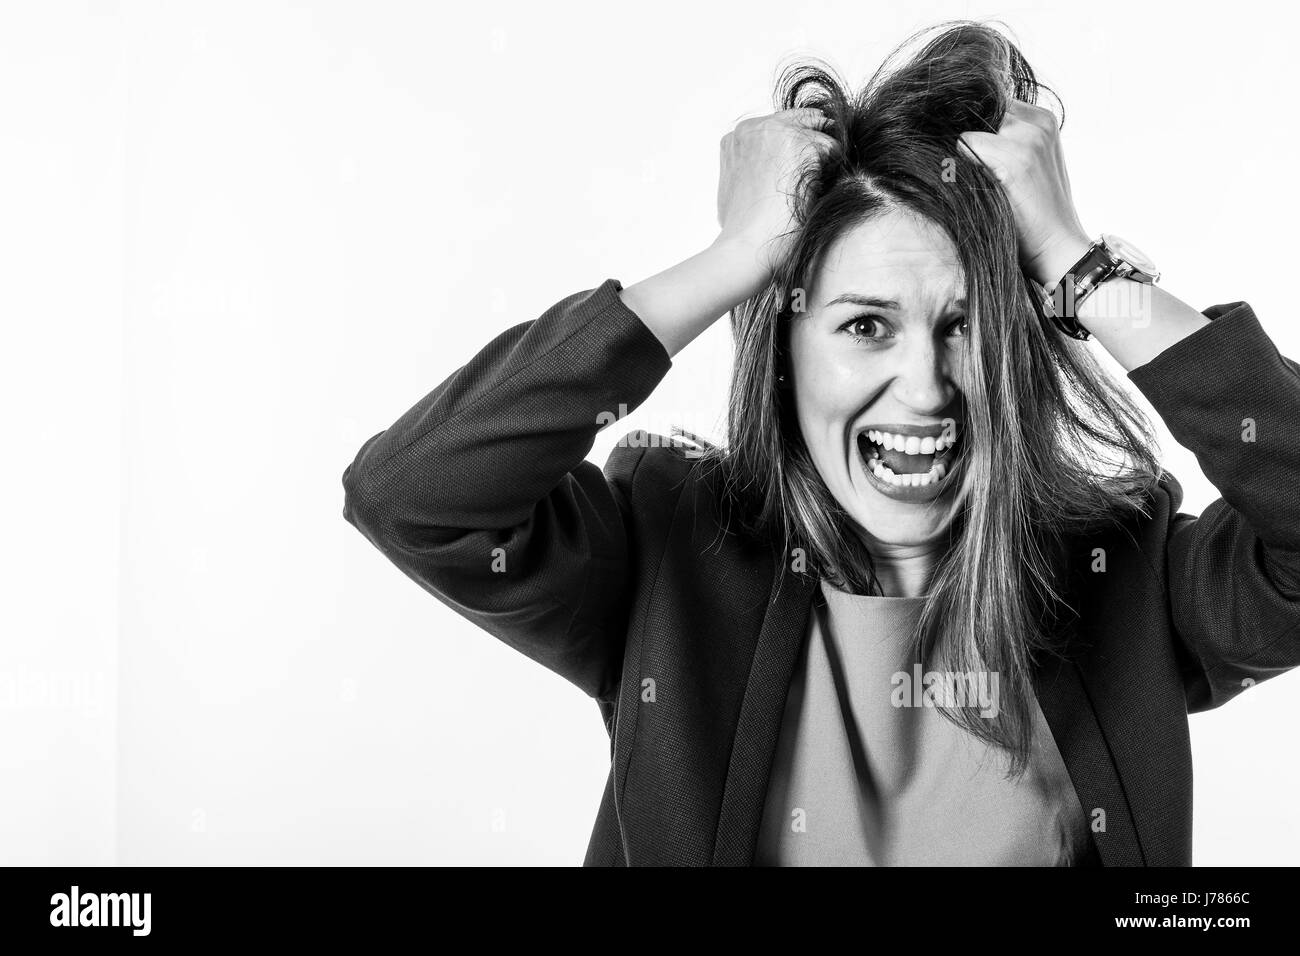 Portrait of a Stressed Young Woman with Screaming Face Expression Stock Photo